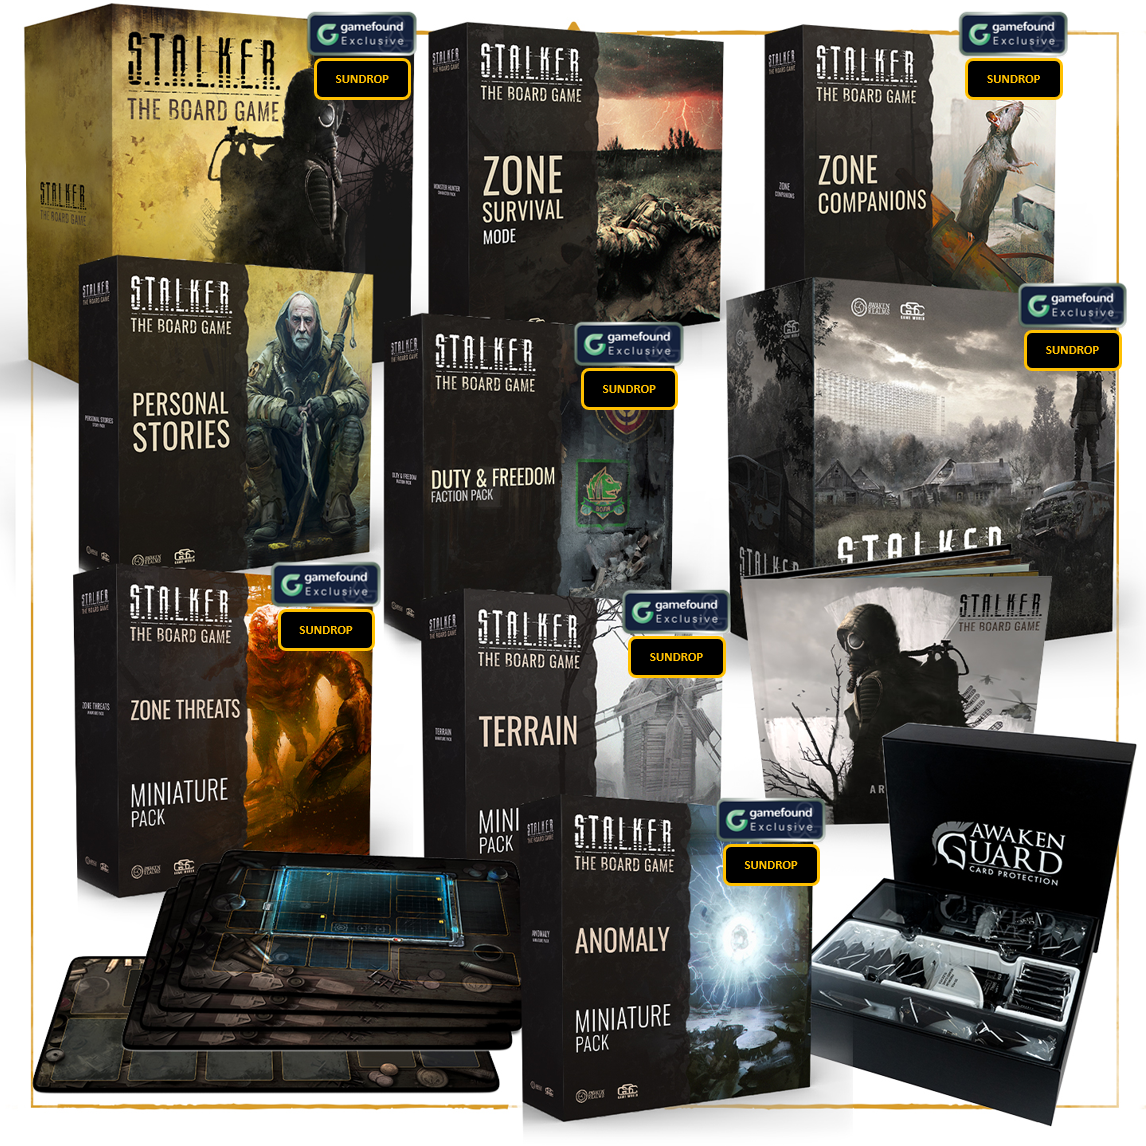 Gamefound Exclusive STALKER: The Board Game Heart of the Zone Pledge, Sundrop Edition